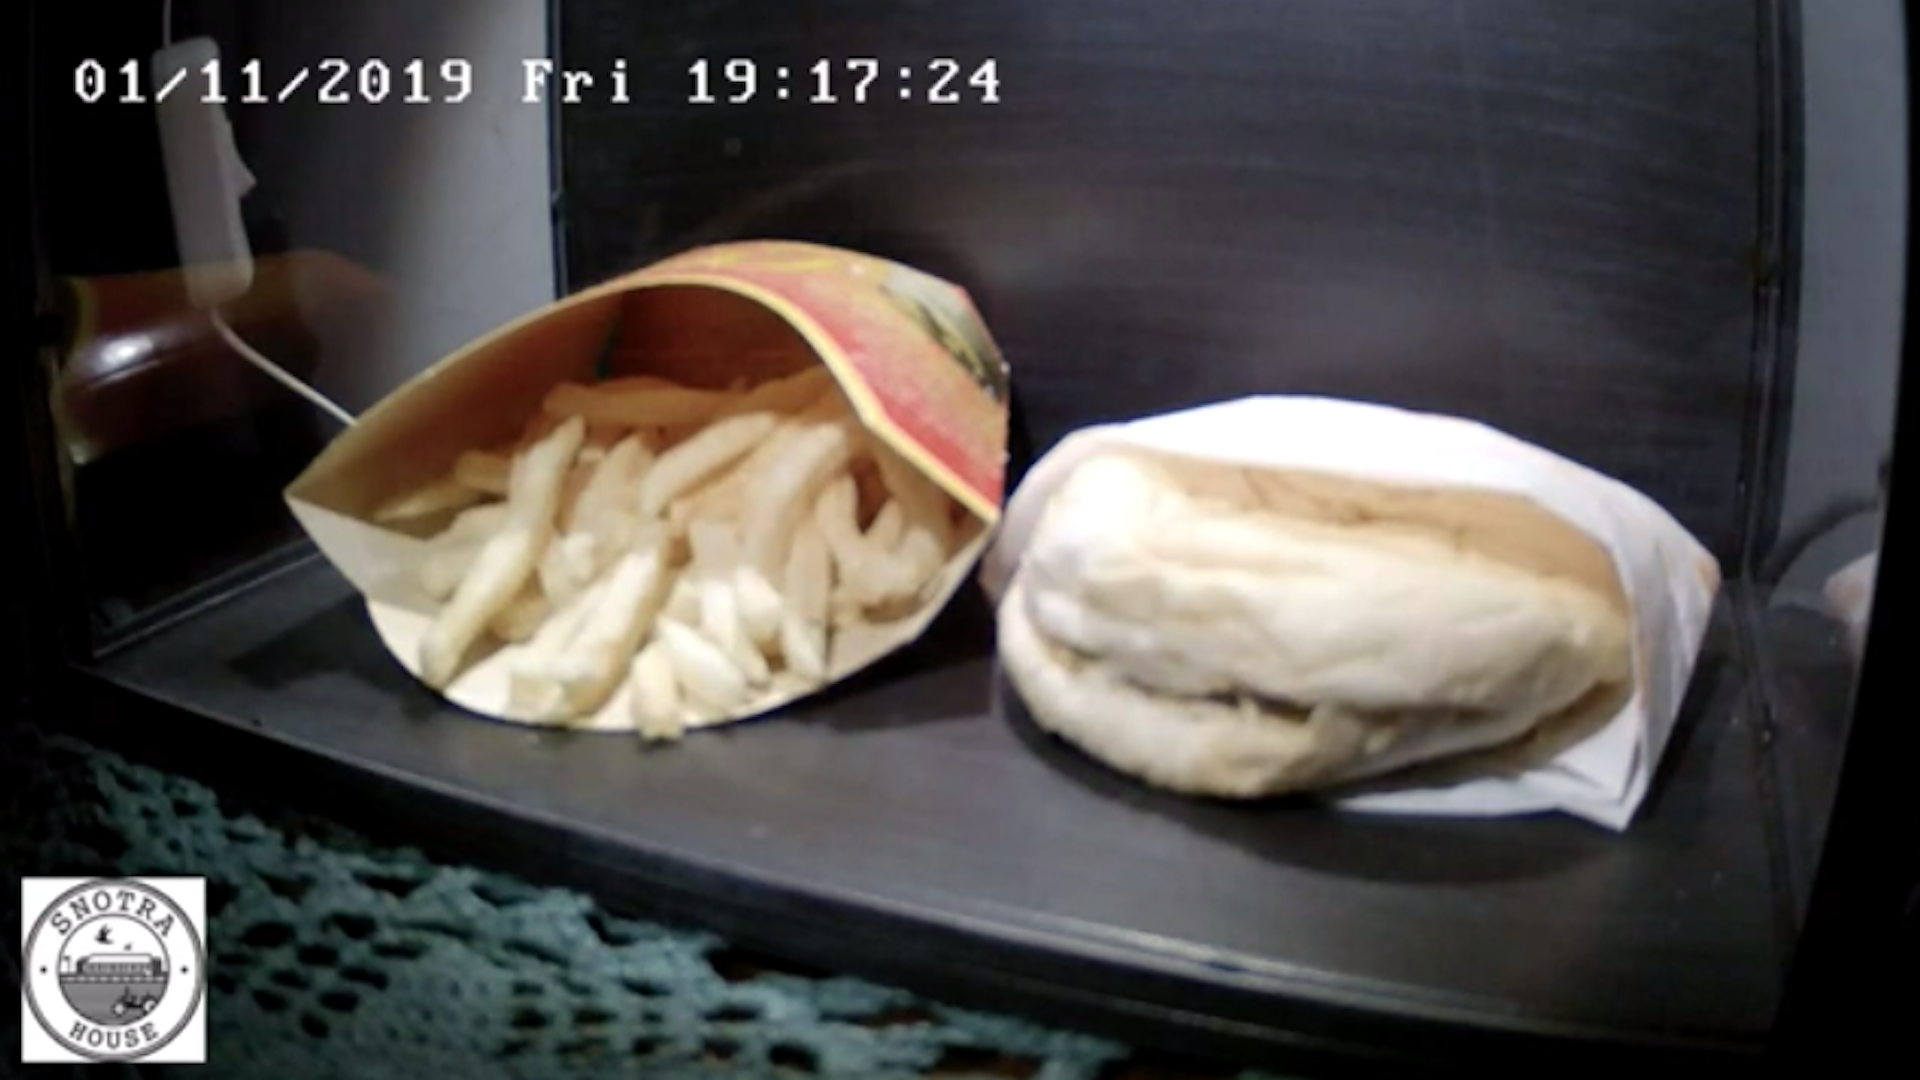 Featured image of post Mcdonalds Burger And Fries Drawing Its own employee resources website recommended workers to avoid burgers and fries whenever possible due to health risks